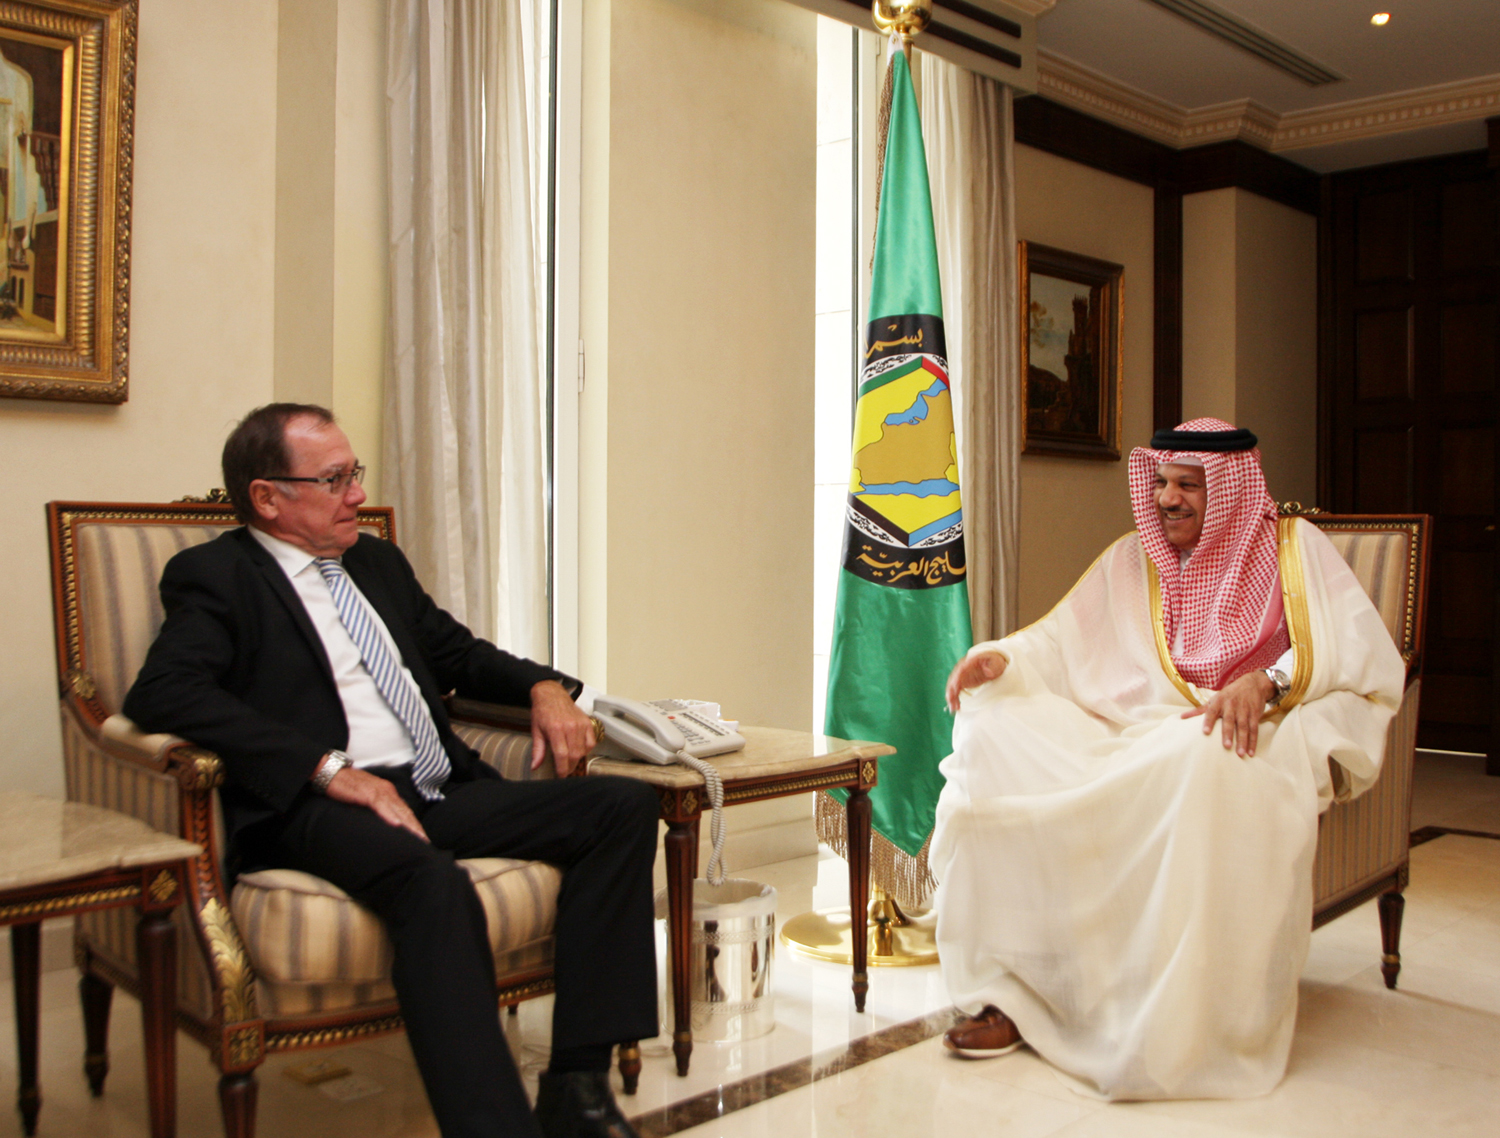 The Gulf Cooperation Council (GCC) of Arab States' Secretary General Abdullatif bin Rashid Al Zayani meets with with New Zealand's Minister of Foreign Affairs Murray McCully